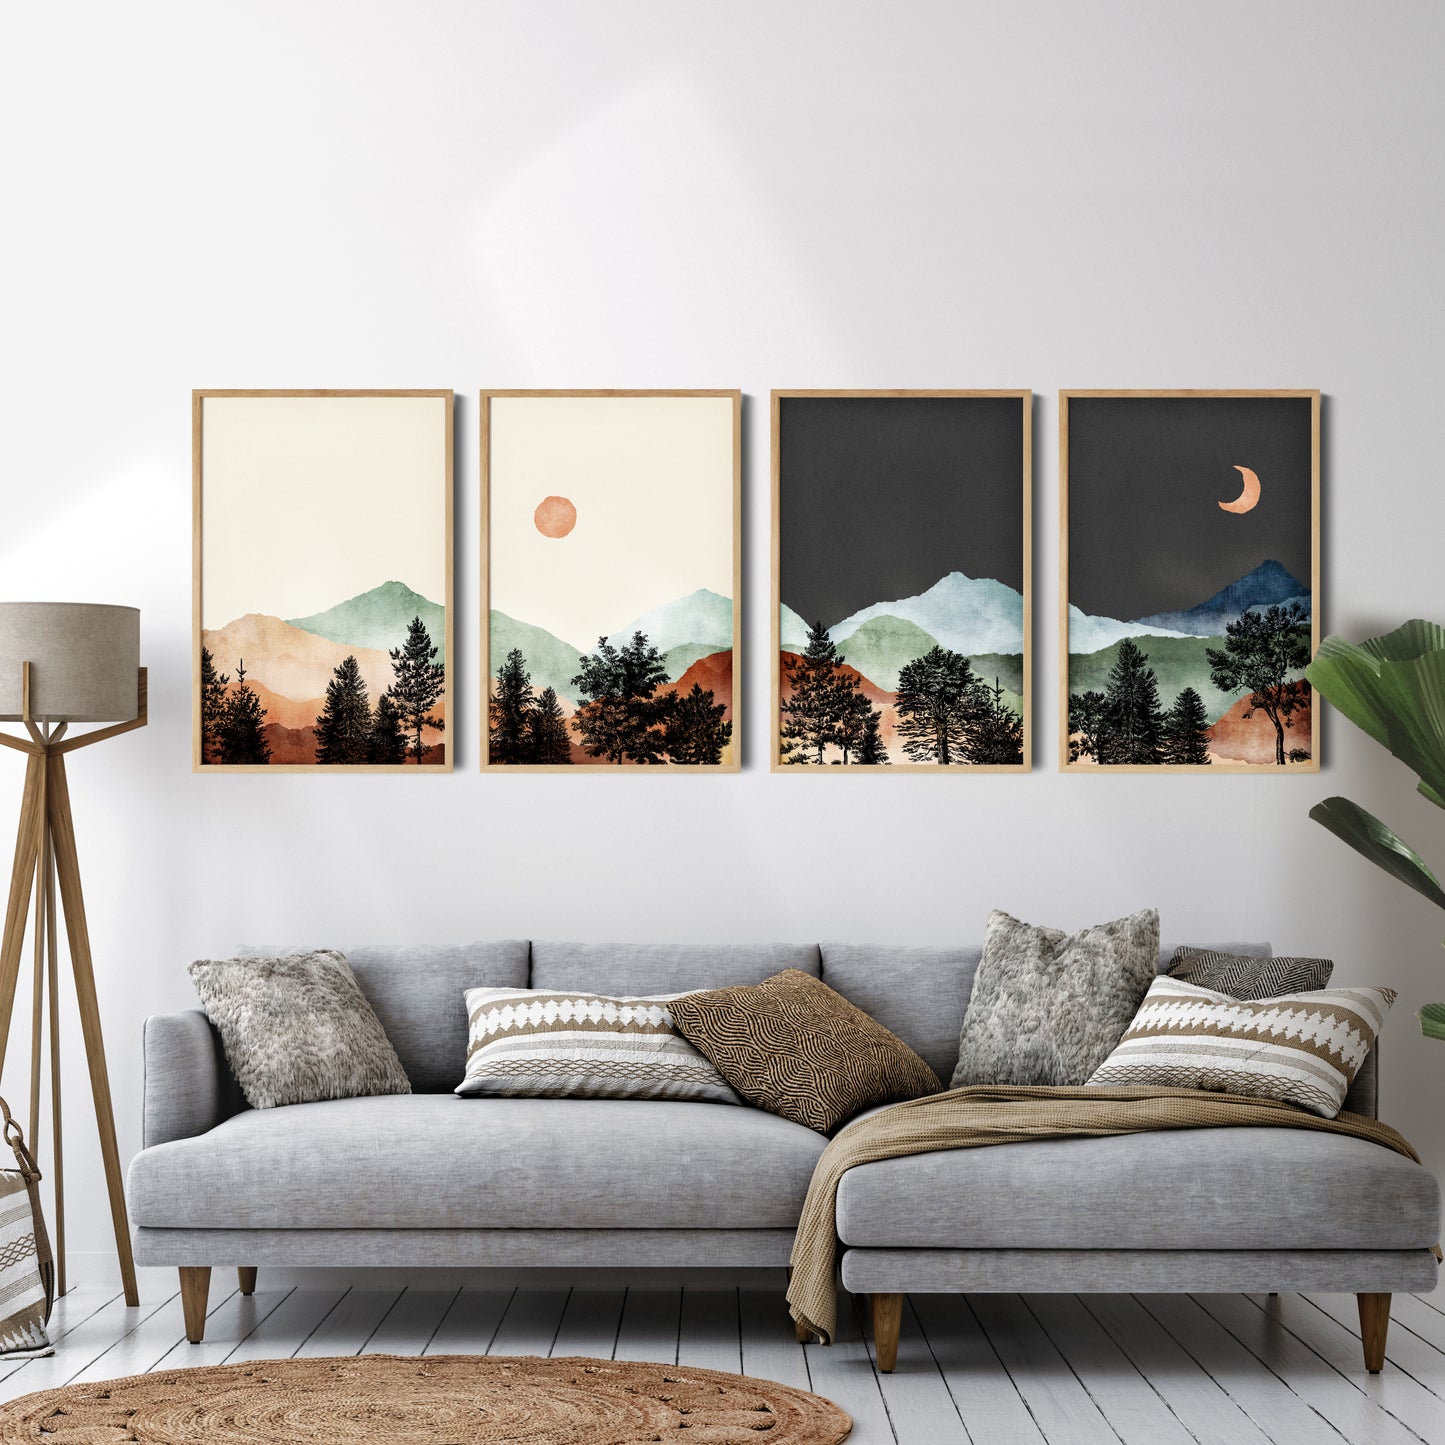 Printable Sun and Moon Landscape Set of 4